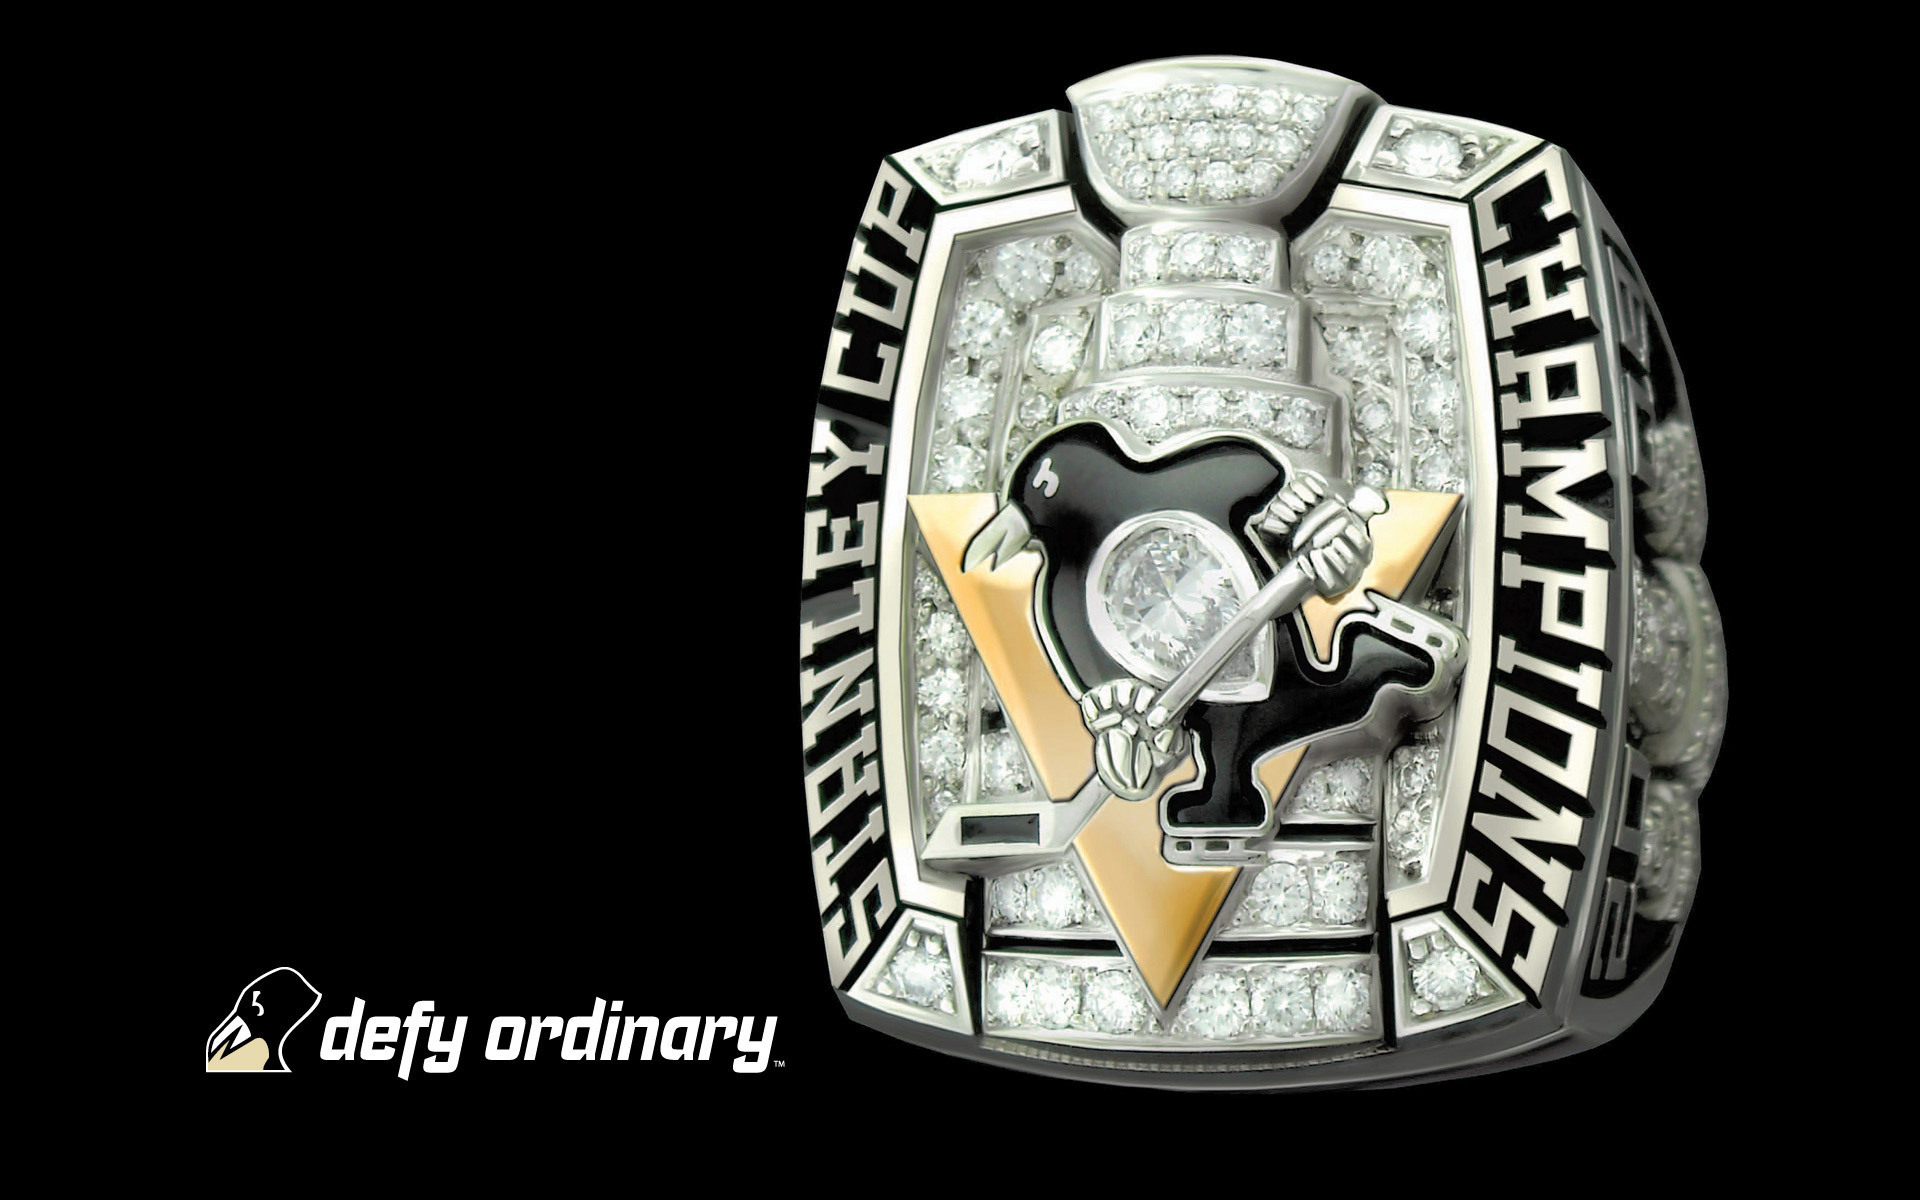 Stanley Cup 2008 09 Ring - 2009 Stanley Cup Ring - HD Wallpaper 